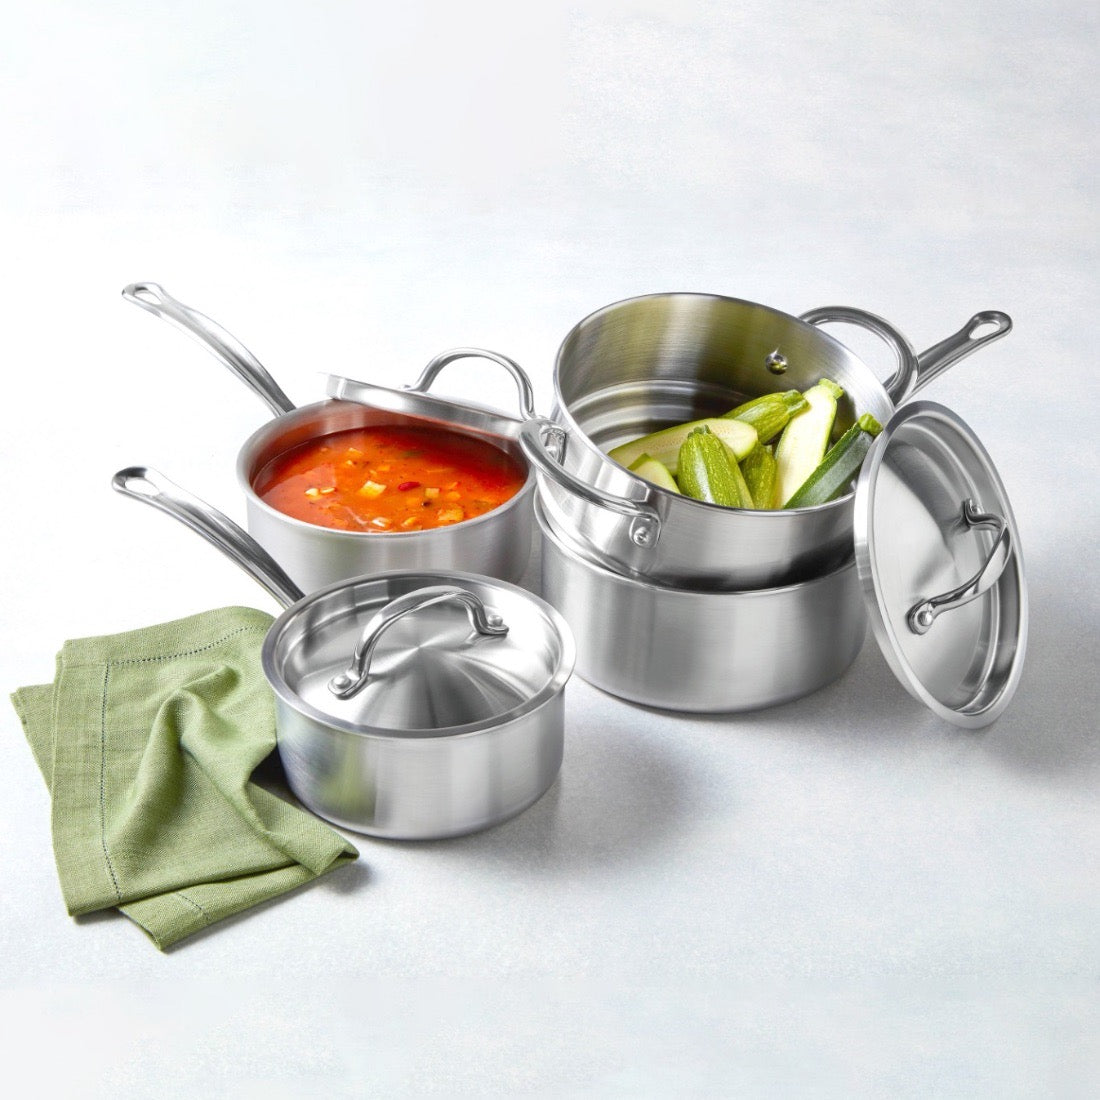 Essteele Per Amore Clad Stainless Steel Induction 4 Piece Cookware Set